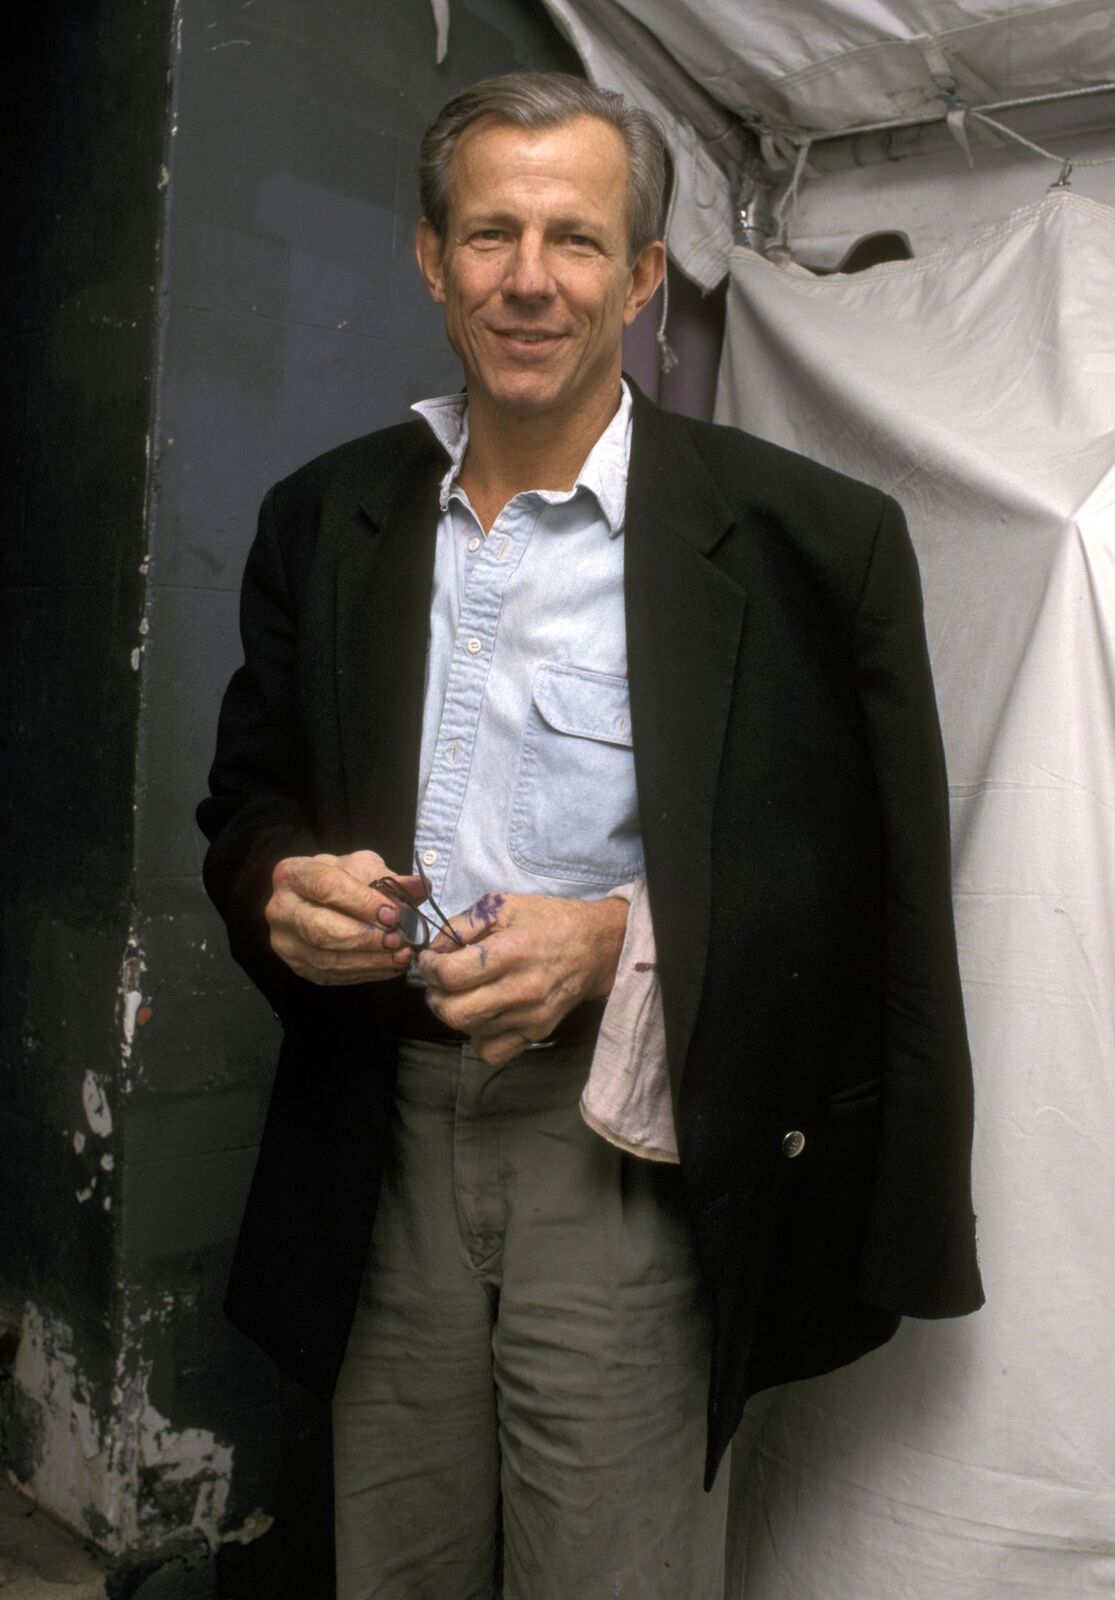 Peter Beard at the 3rd Annual Tribeca Ball Benefit on March 14, 1996 | Photo: Ron Galella/Getty Images